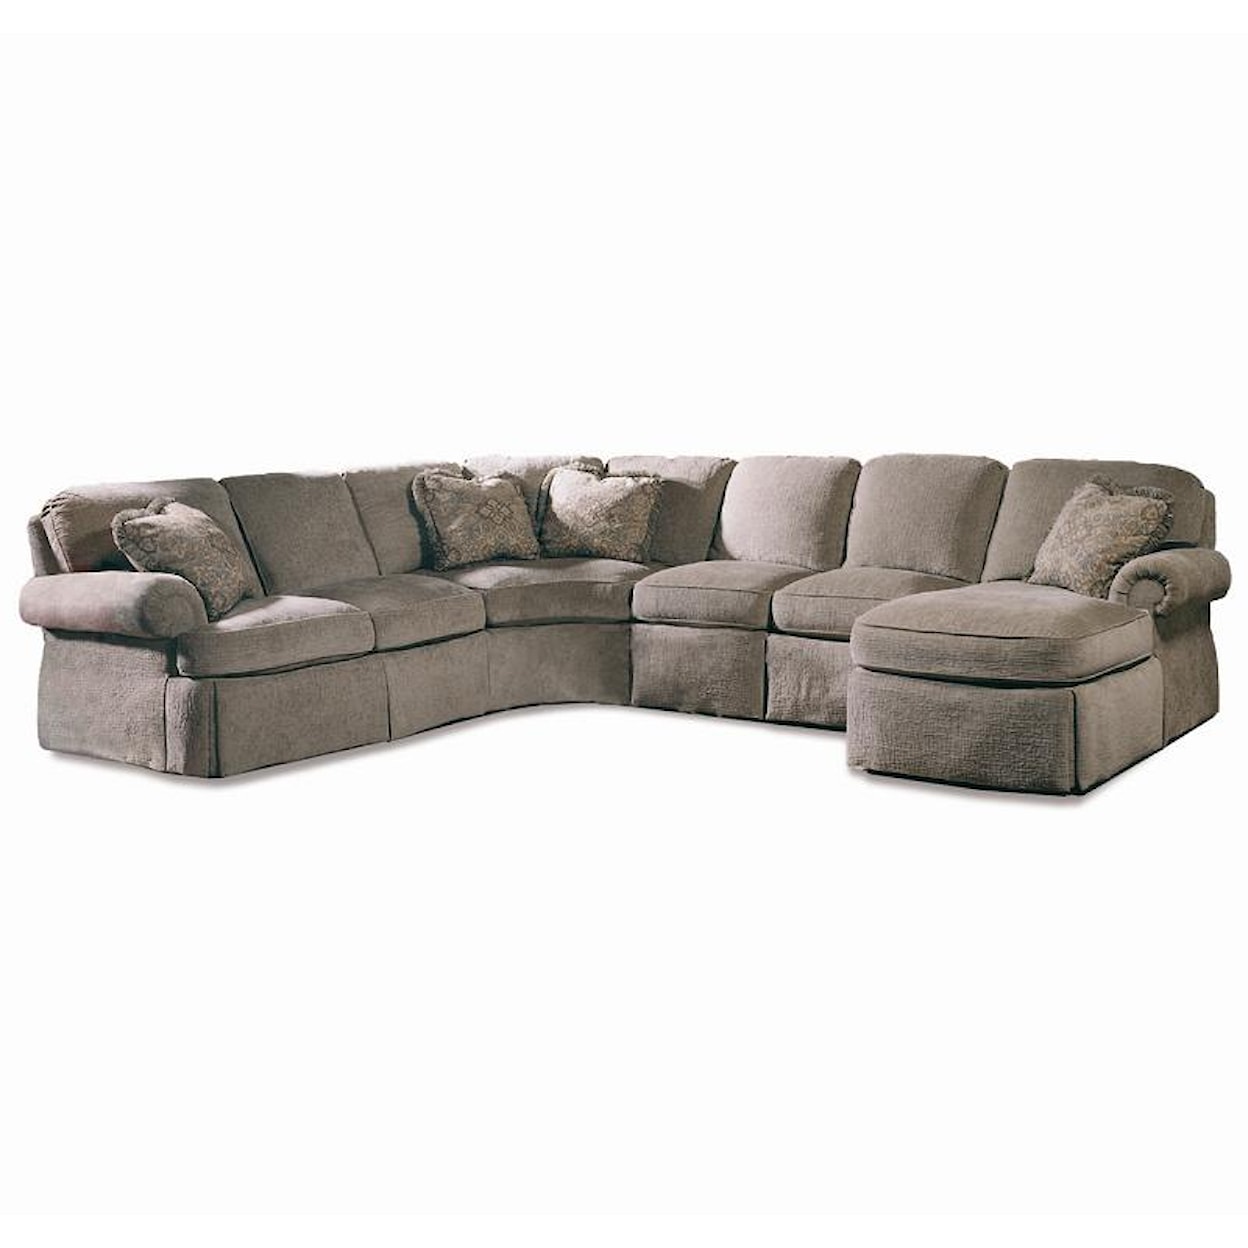 Sherrill Design Your Own 5 Pc. Sectional